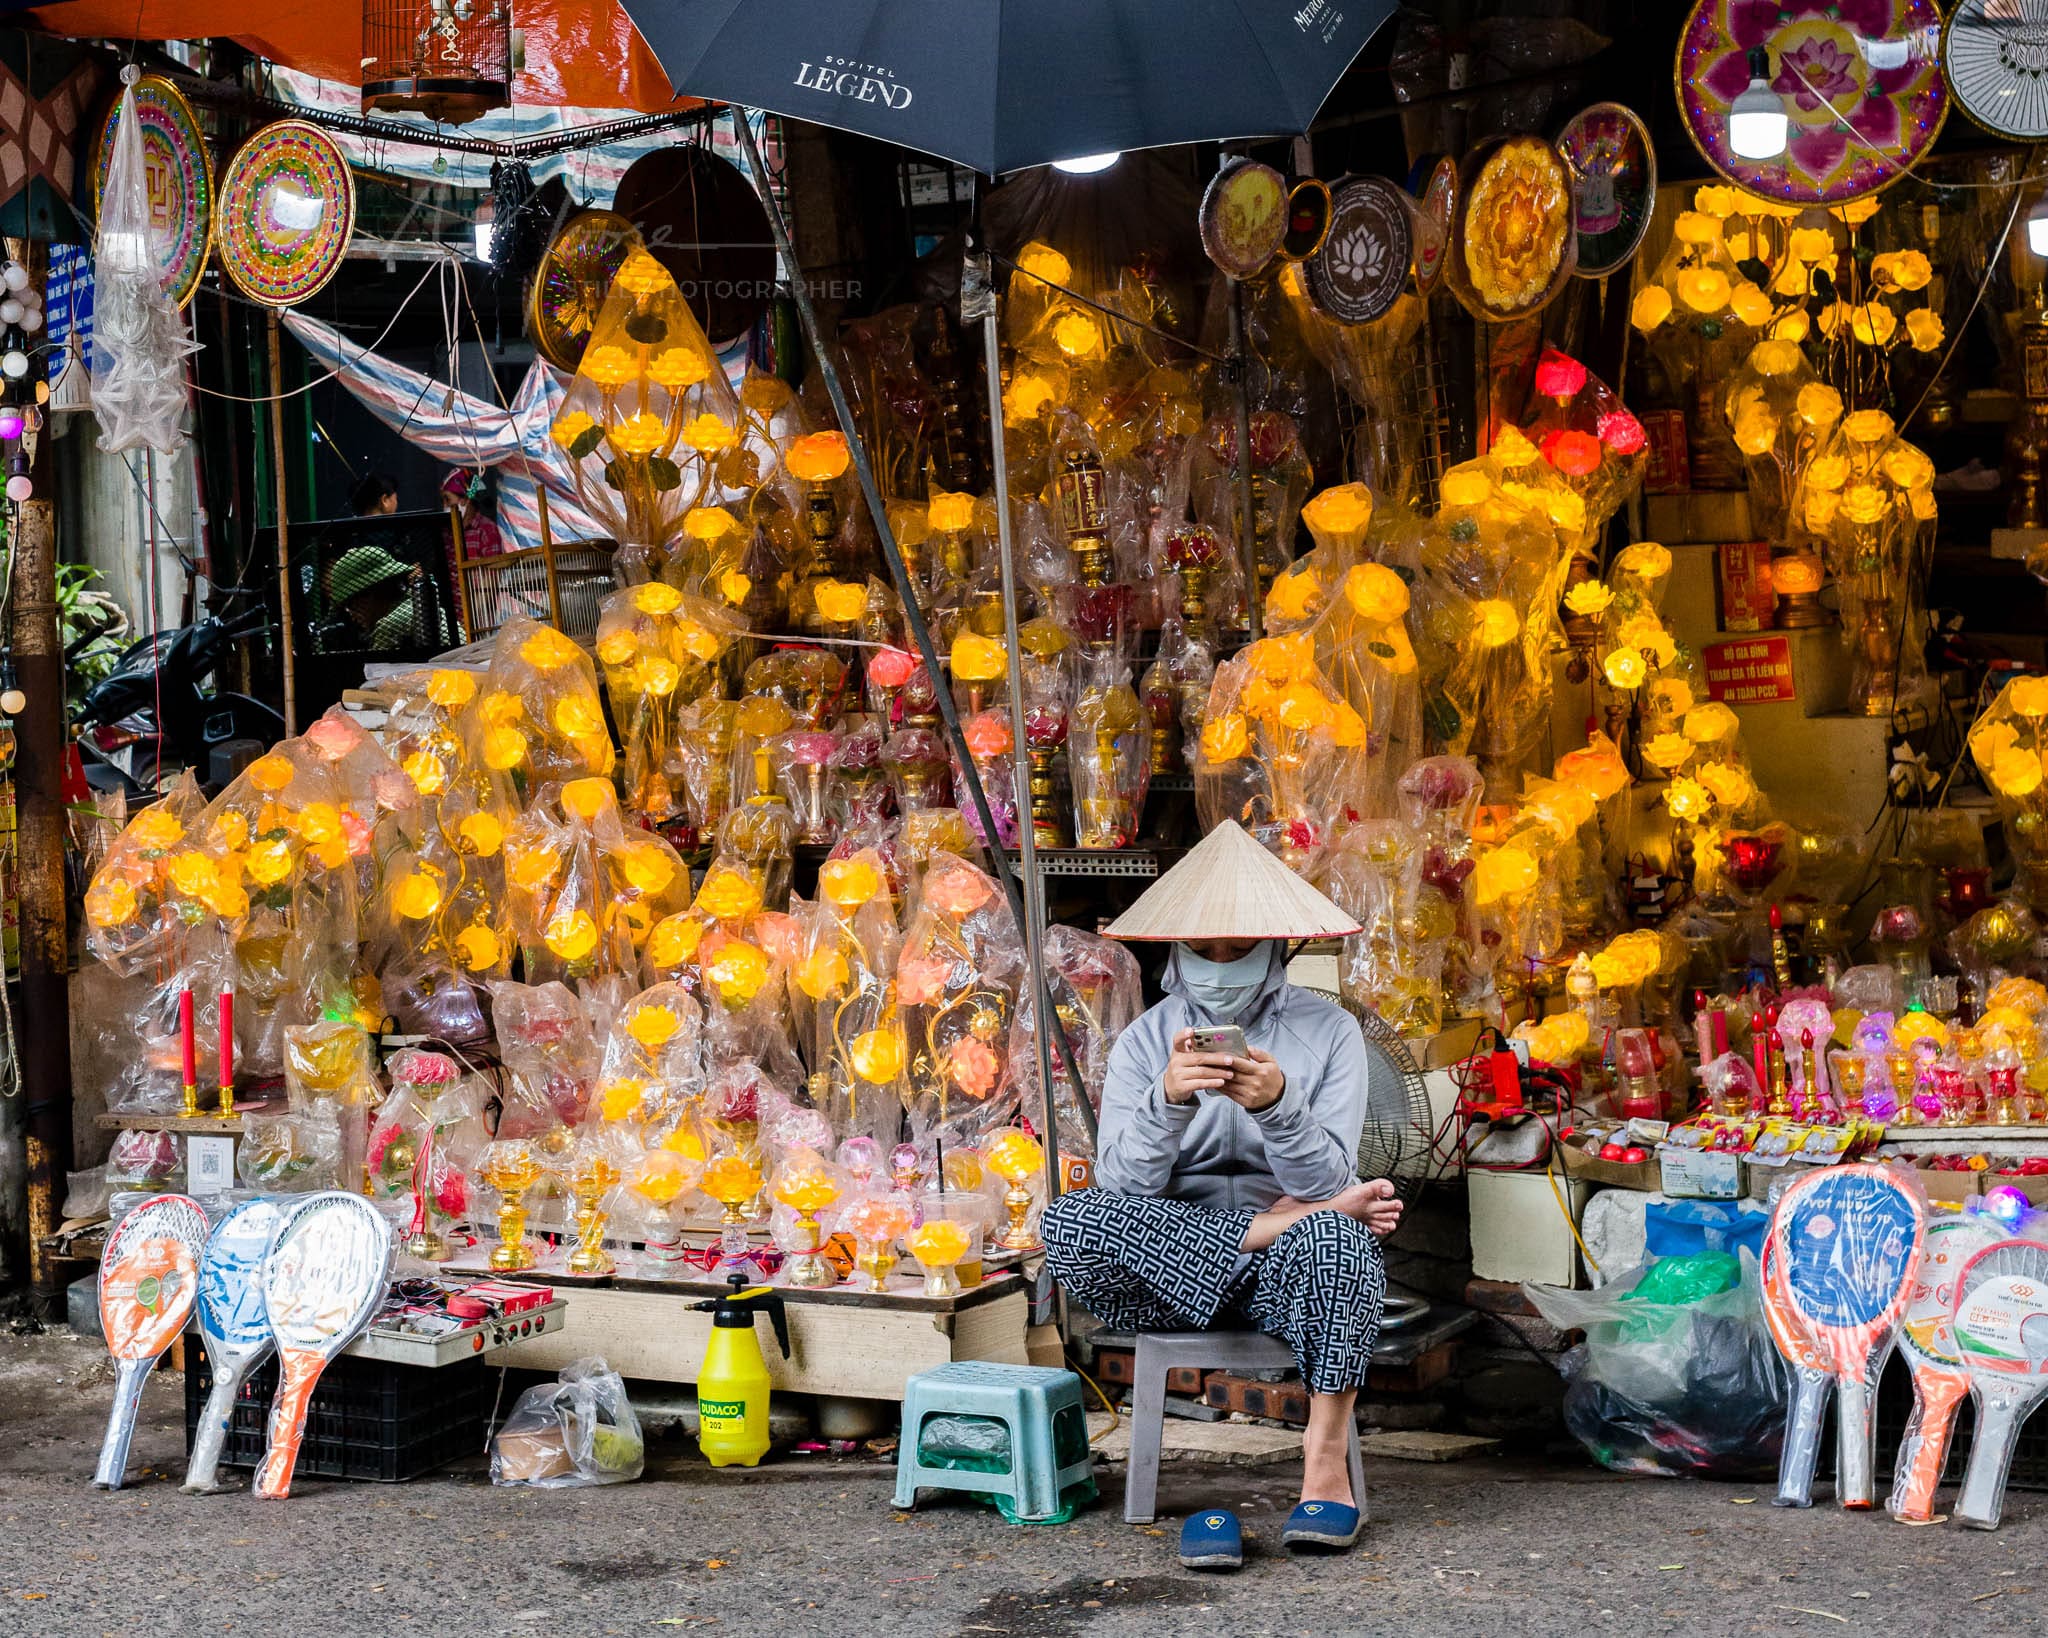 Vendor in traditional Vietnamese attire using smartphone amid colorful handmade lanterns in a bustling market.